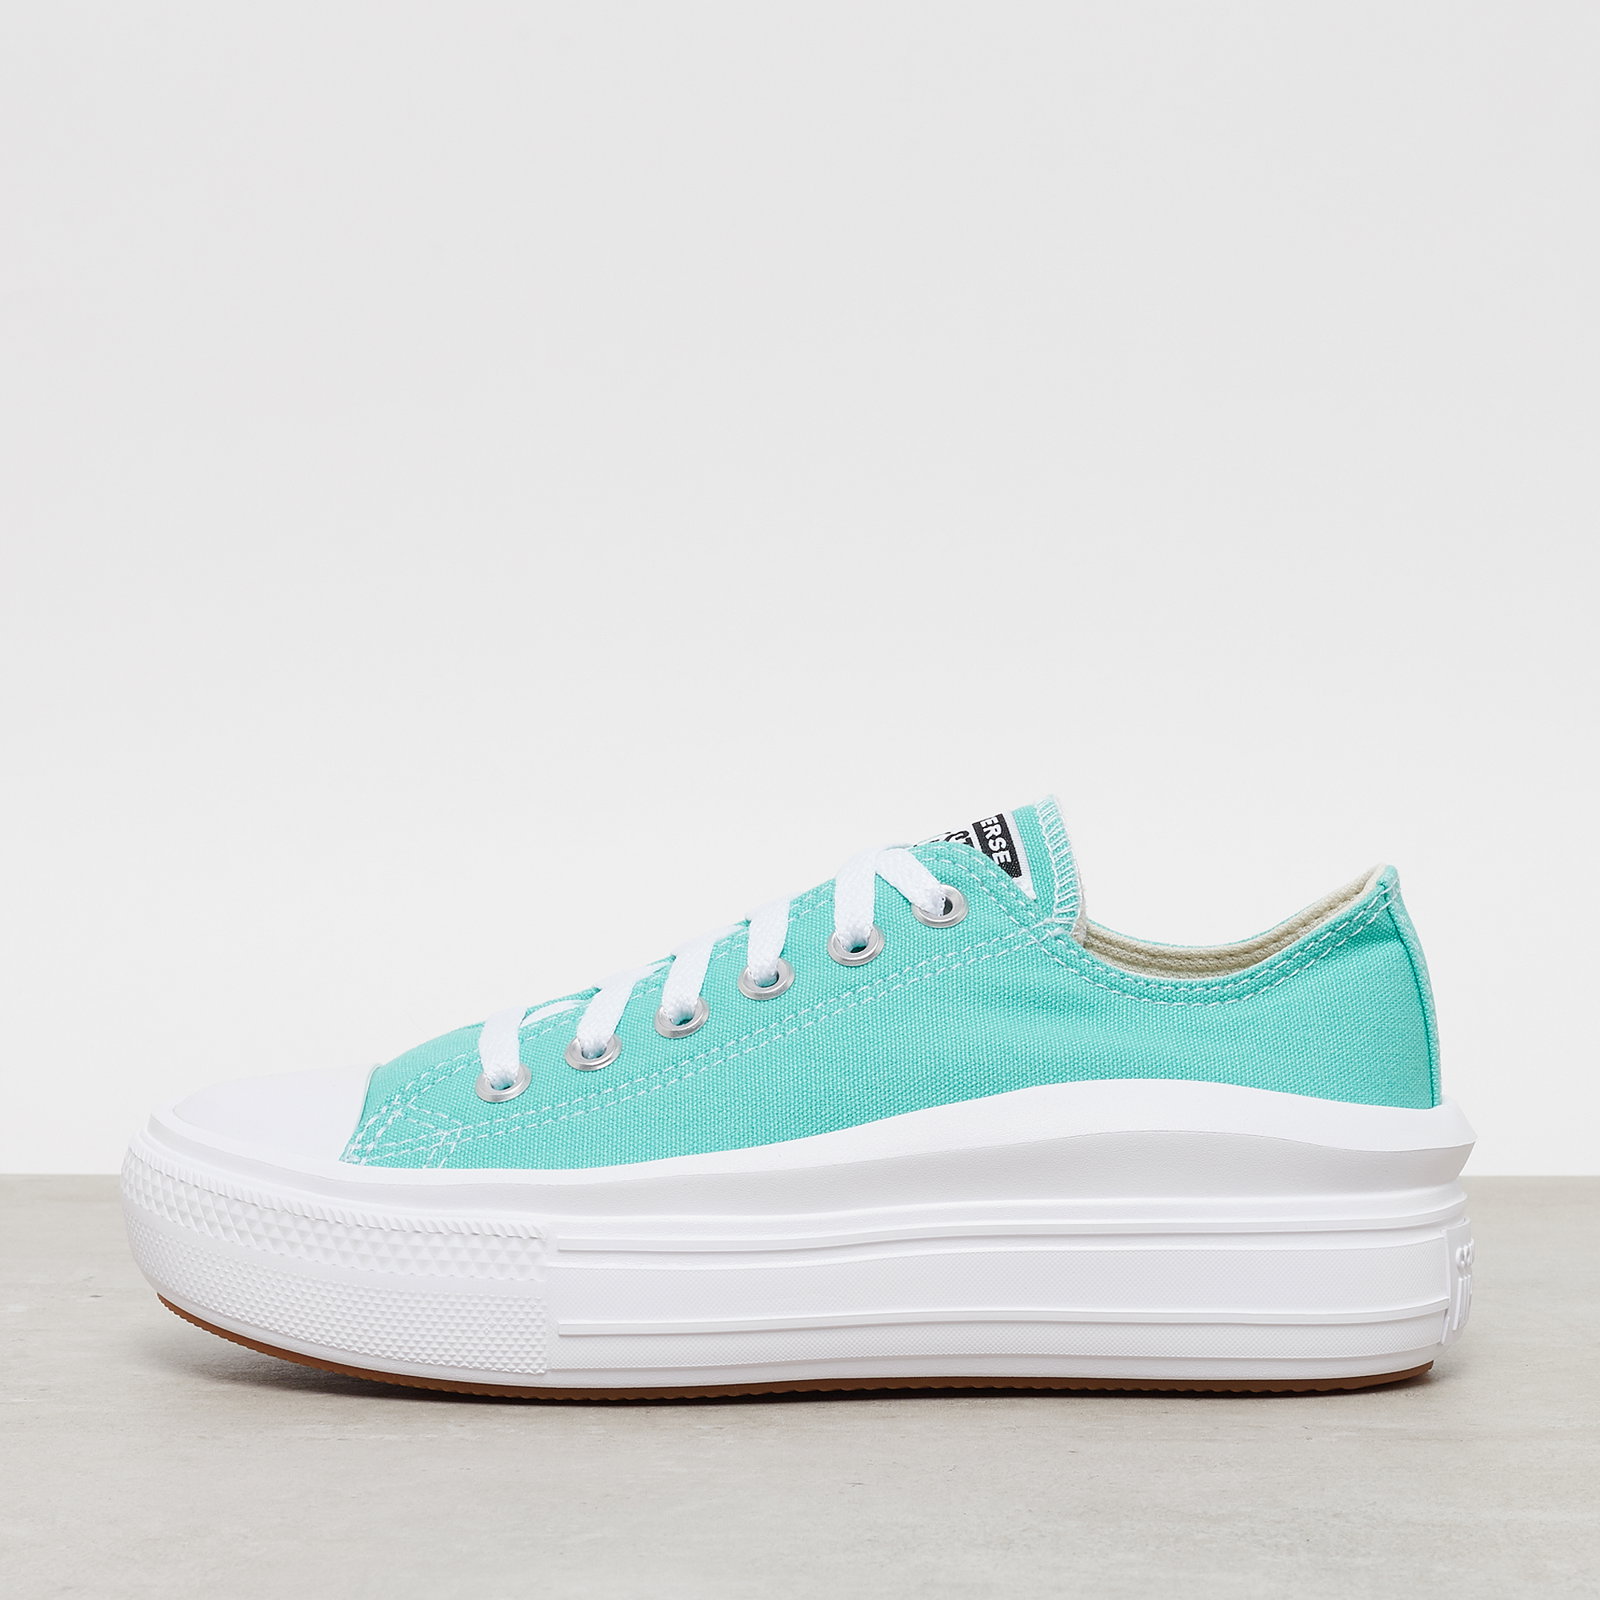 Turquoise sneakers and shoes Converse